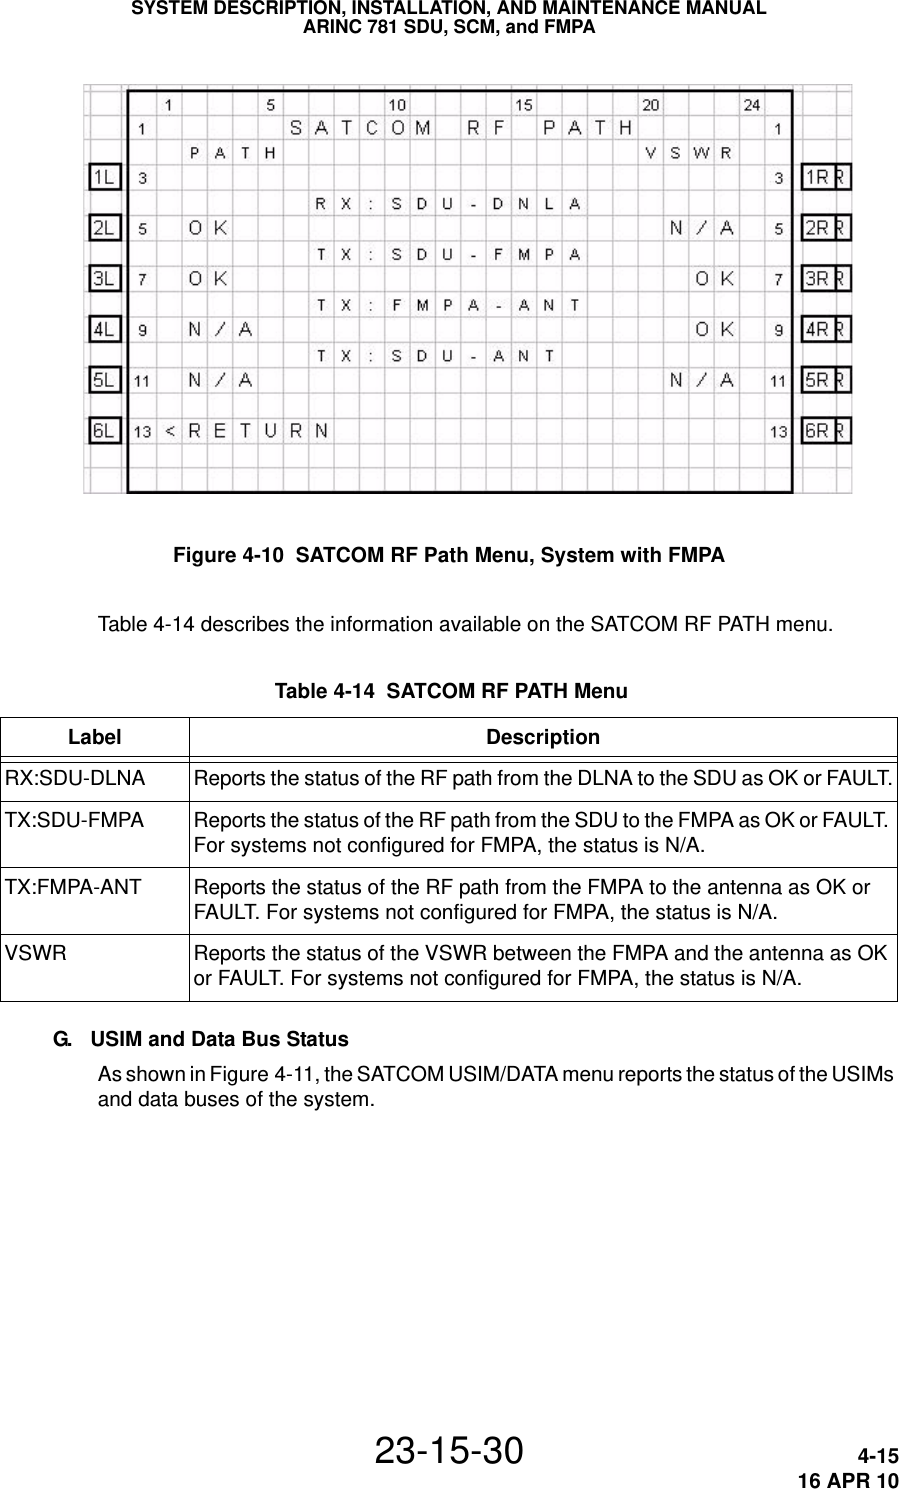 SYSTEM DESCRIPTION, INSTALLATION, AND MAINTENANCE MANUALARINC 781 SDU, SCM, and FMPA23-15-30 4-1516 APR 10 Figure 4-10  SATCOM RF Path Menu, System with FMPATable 4-14 describes the information available on the SATCOM RF PATH menu.G. USIM and Data Bus StatusAs shown in Figure 4-11, the SATCOM USIM/DATA menu reports the status of the USIMs and data buses of the system. Table 4-14  SATCOM RF PATH Menu Label DescriptionRX:SDU-DLNA Reports the status of the RF path from the DLNA to the SDU as OK or FAULT.TX:SDU-FMPA Reports the status of the RF path from the SDU to the FMPA as OK or FAULT. For systems not configured for FMPA, the status is N/A.TX:FMPA-ANT Reports the status of the RF path from the FMPA to the antenna as OK or FAULT. For systems not configured for FMPA, the status is N/A.VSWR Reports the status of the VSWR between the FMPA and the antenna as OK or FAULT. For systems not configured for FMPA, the status is N/A.